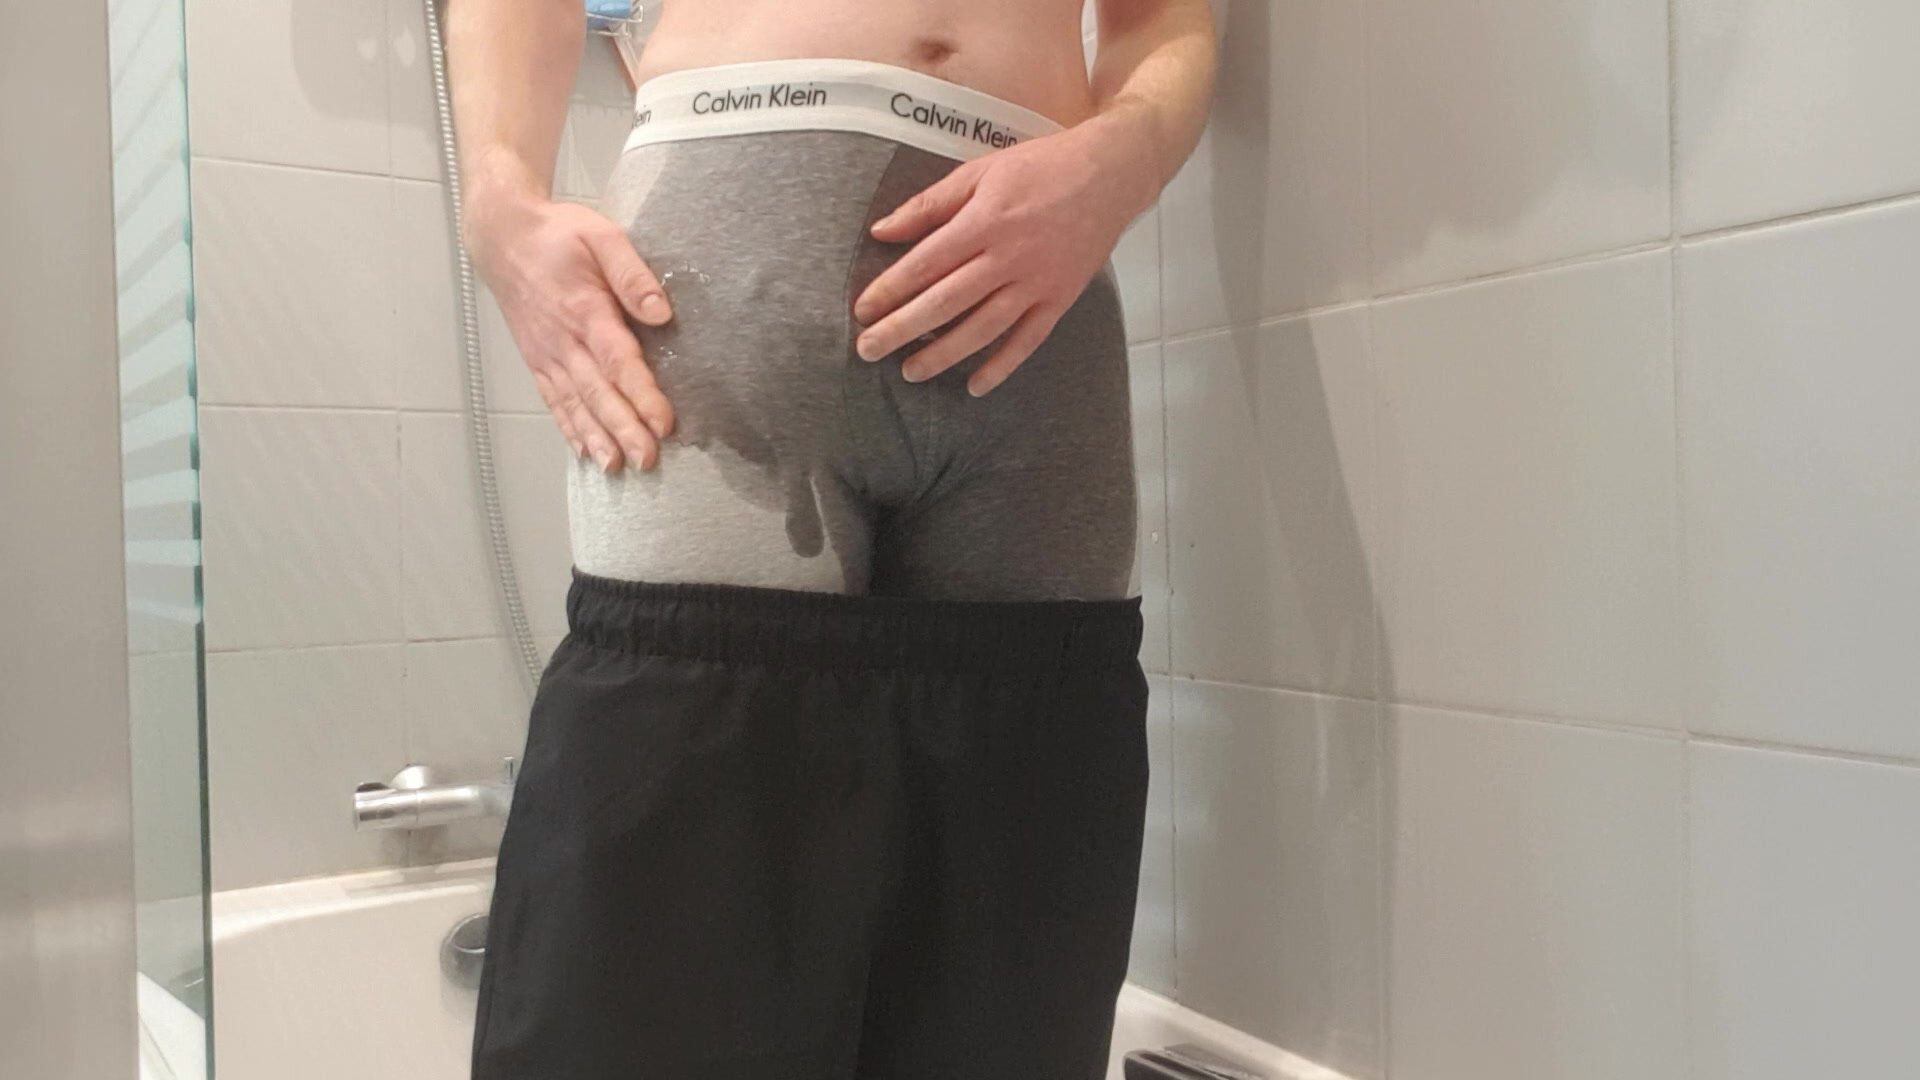 Continued pissing my underwear and trackies